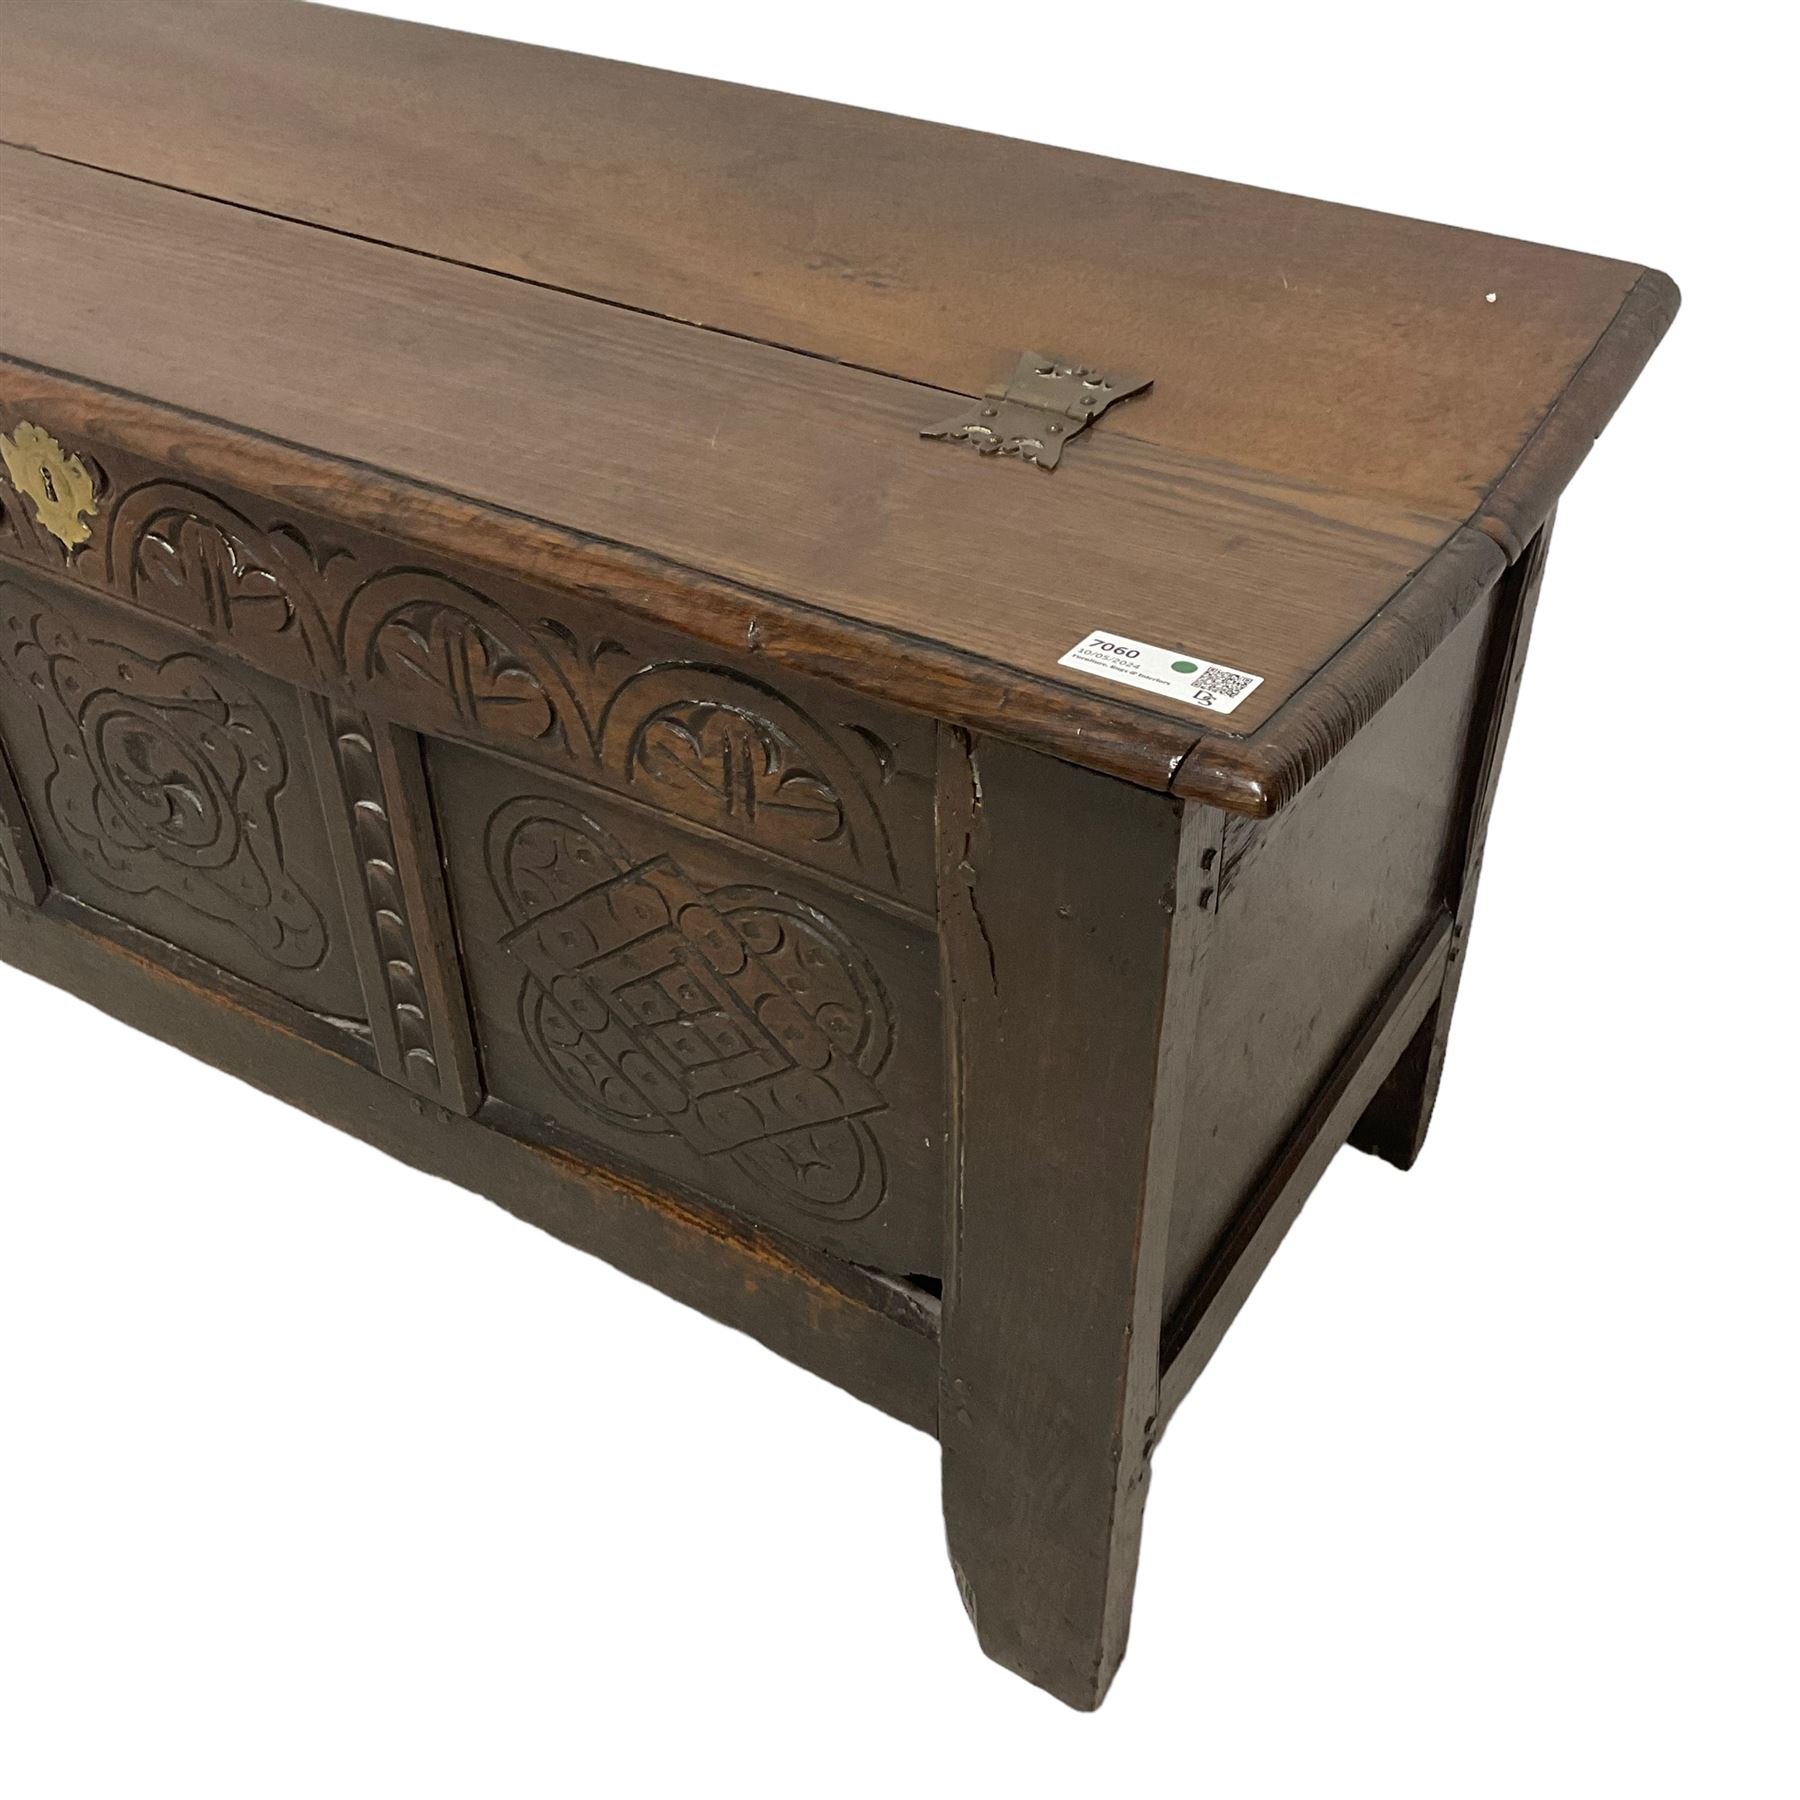 18th century oak coffer or chest - Image 3 of 6